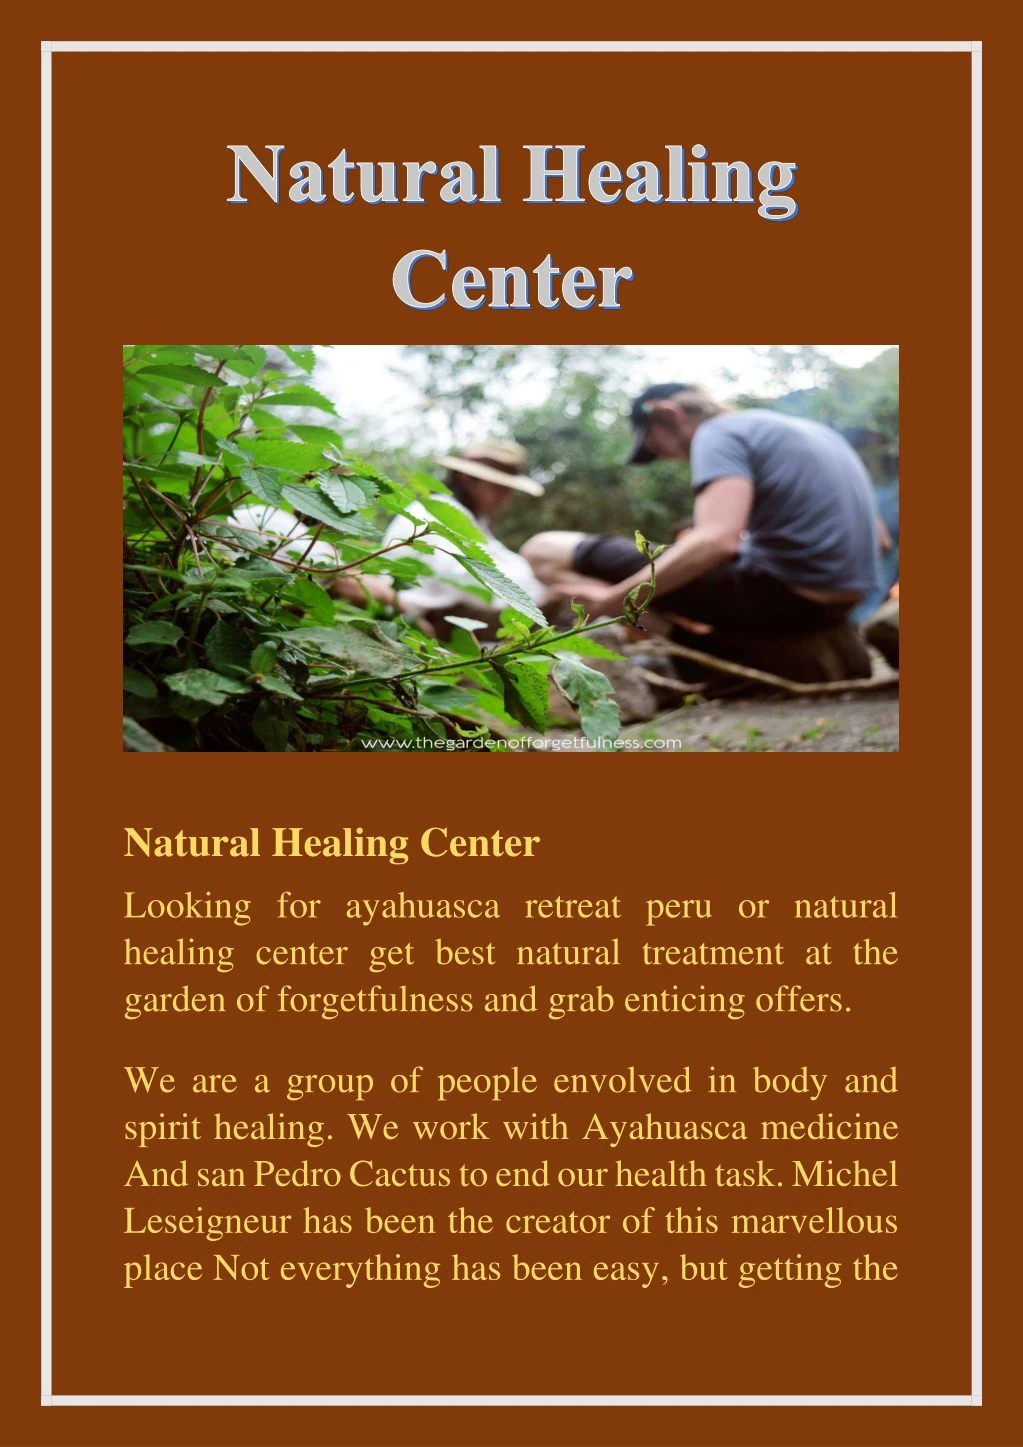 natural healing center looking for ayahuasca